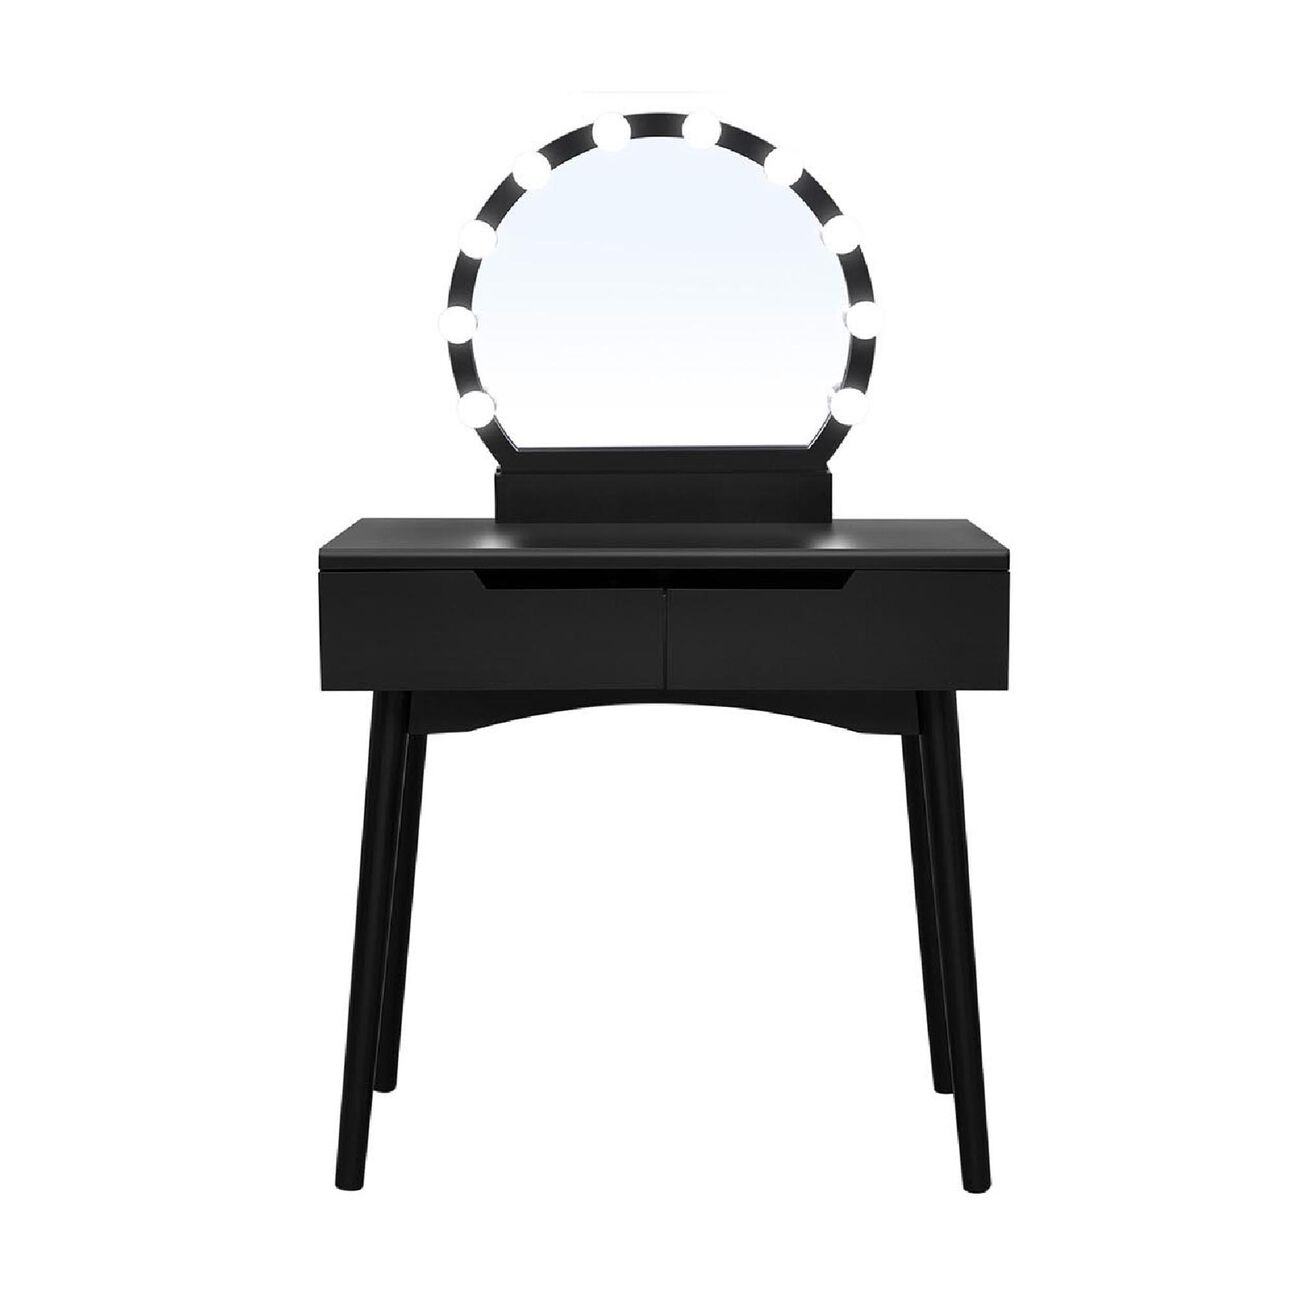 Wooden Frame Vanity Set with Padded Stool and LED Trim on Mirror, Black